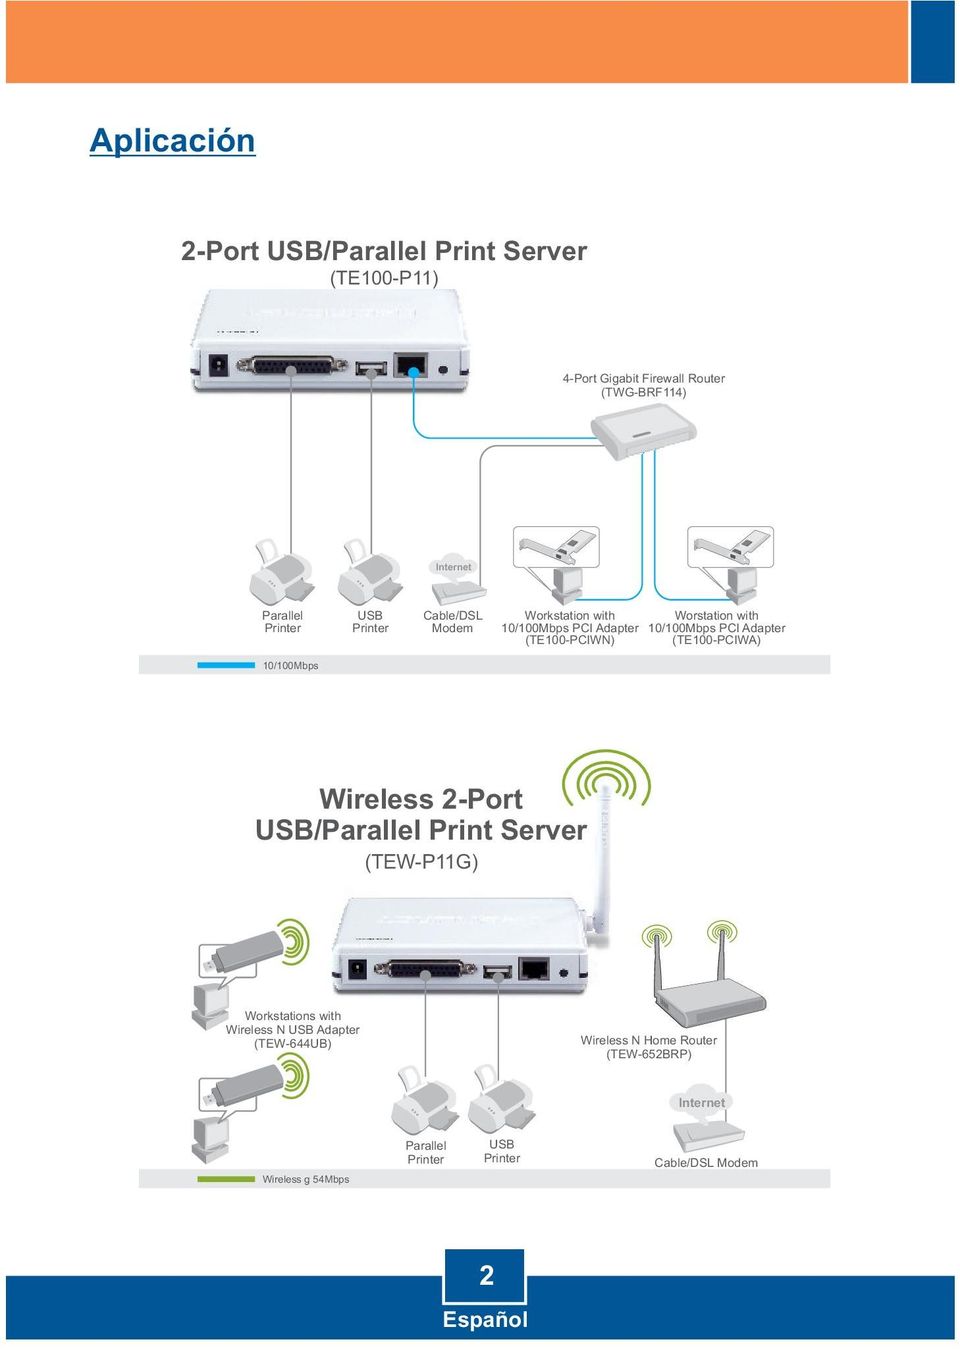 (TE100-PCIWN) (TE100-PCIWA) 10/100Mbps Wireless 2-Port USB/Parallel Print Server (TEW-P11G) Workstations with Wireless N